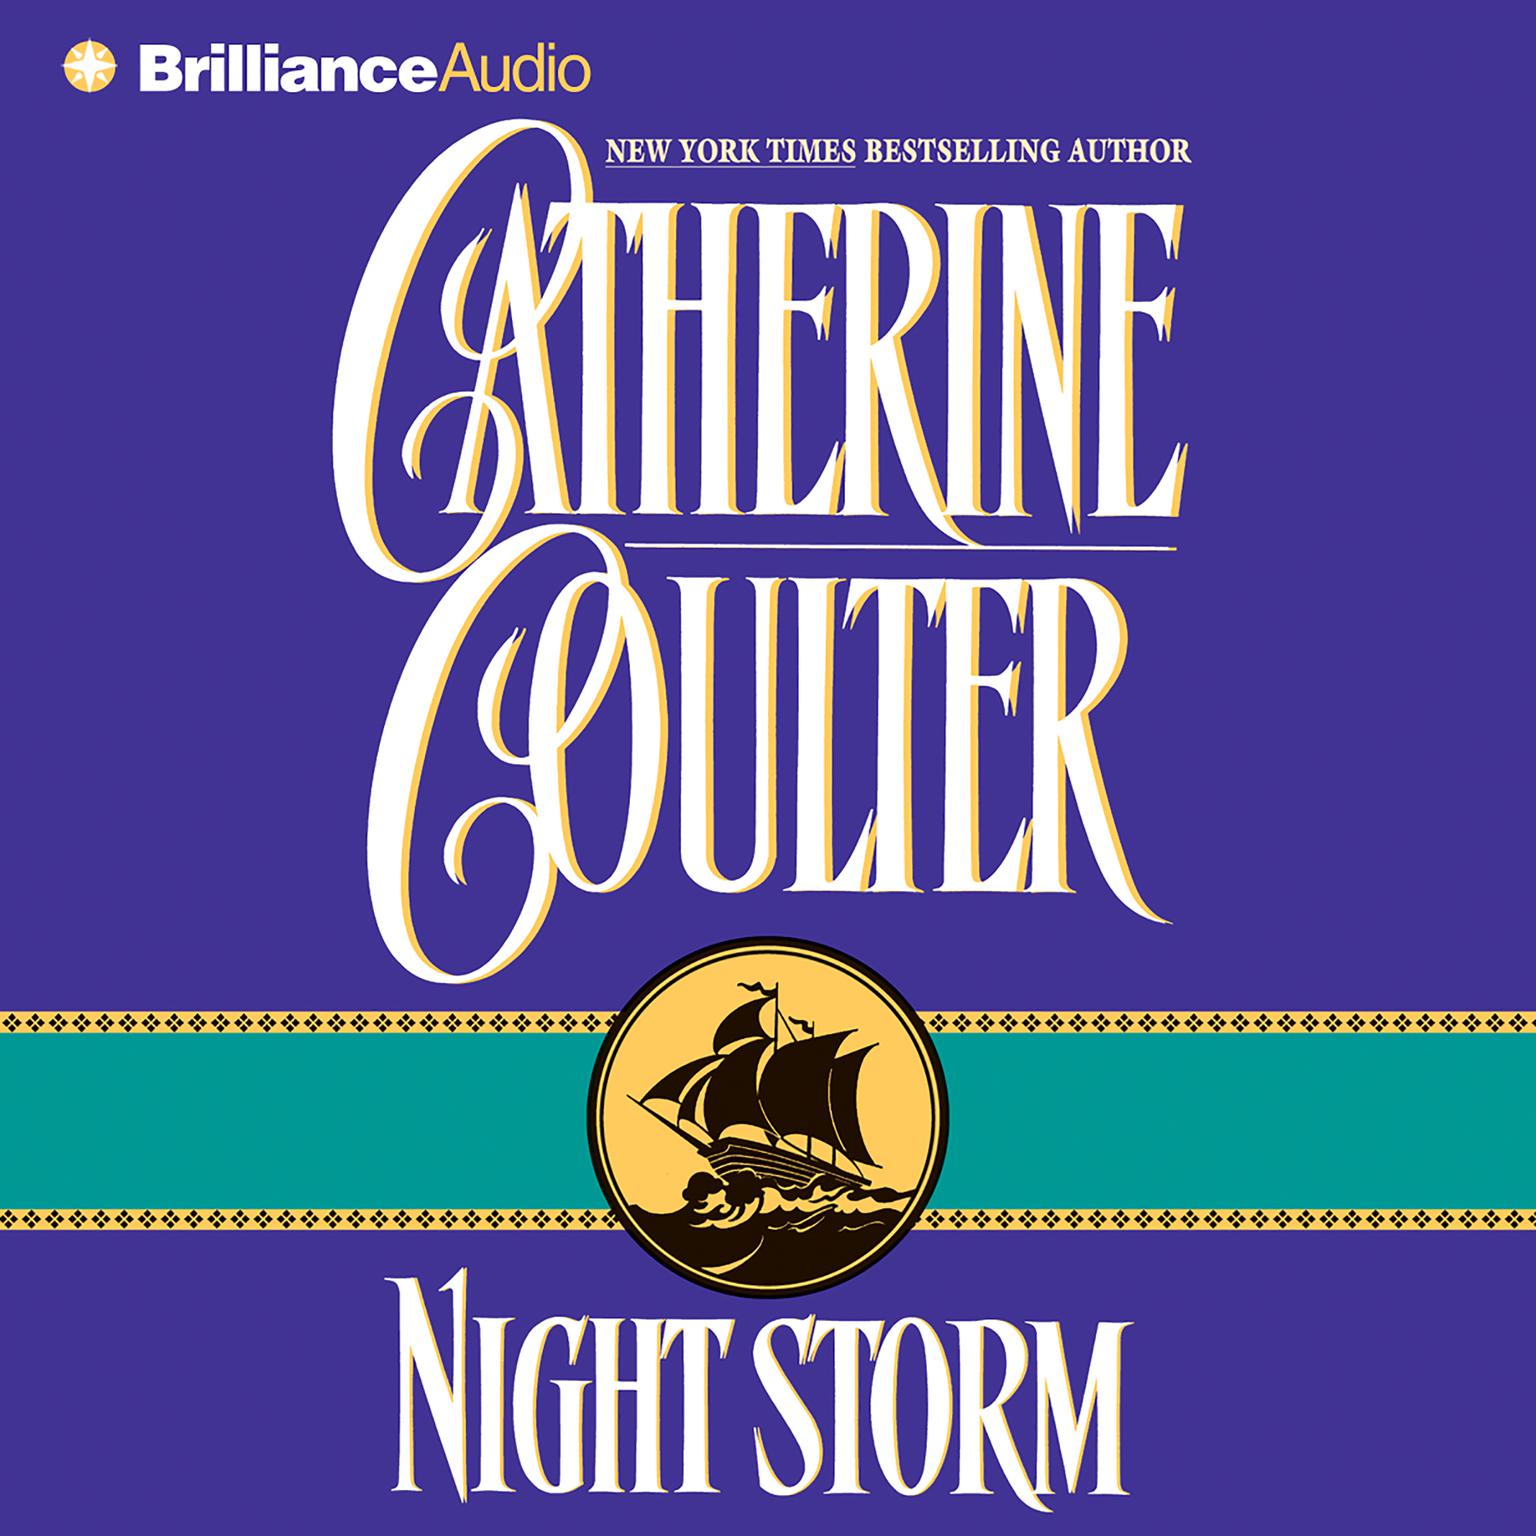 Night Storm (Abridged) Audiobook, by Catherine Coulter